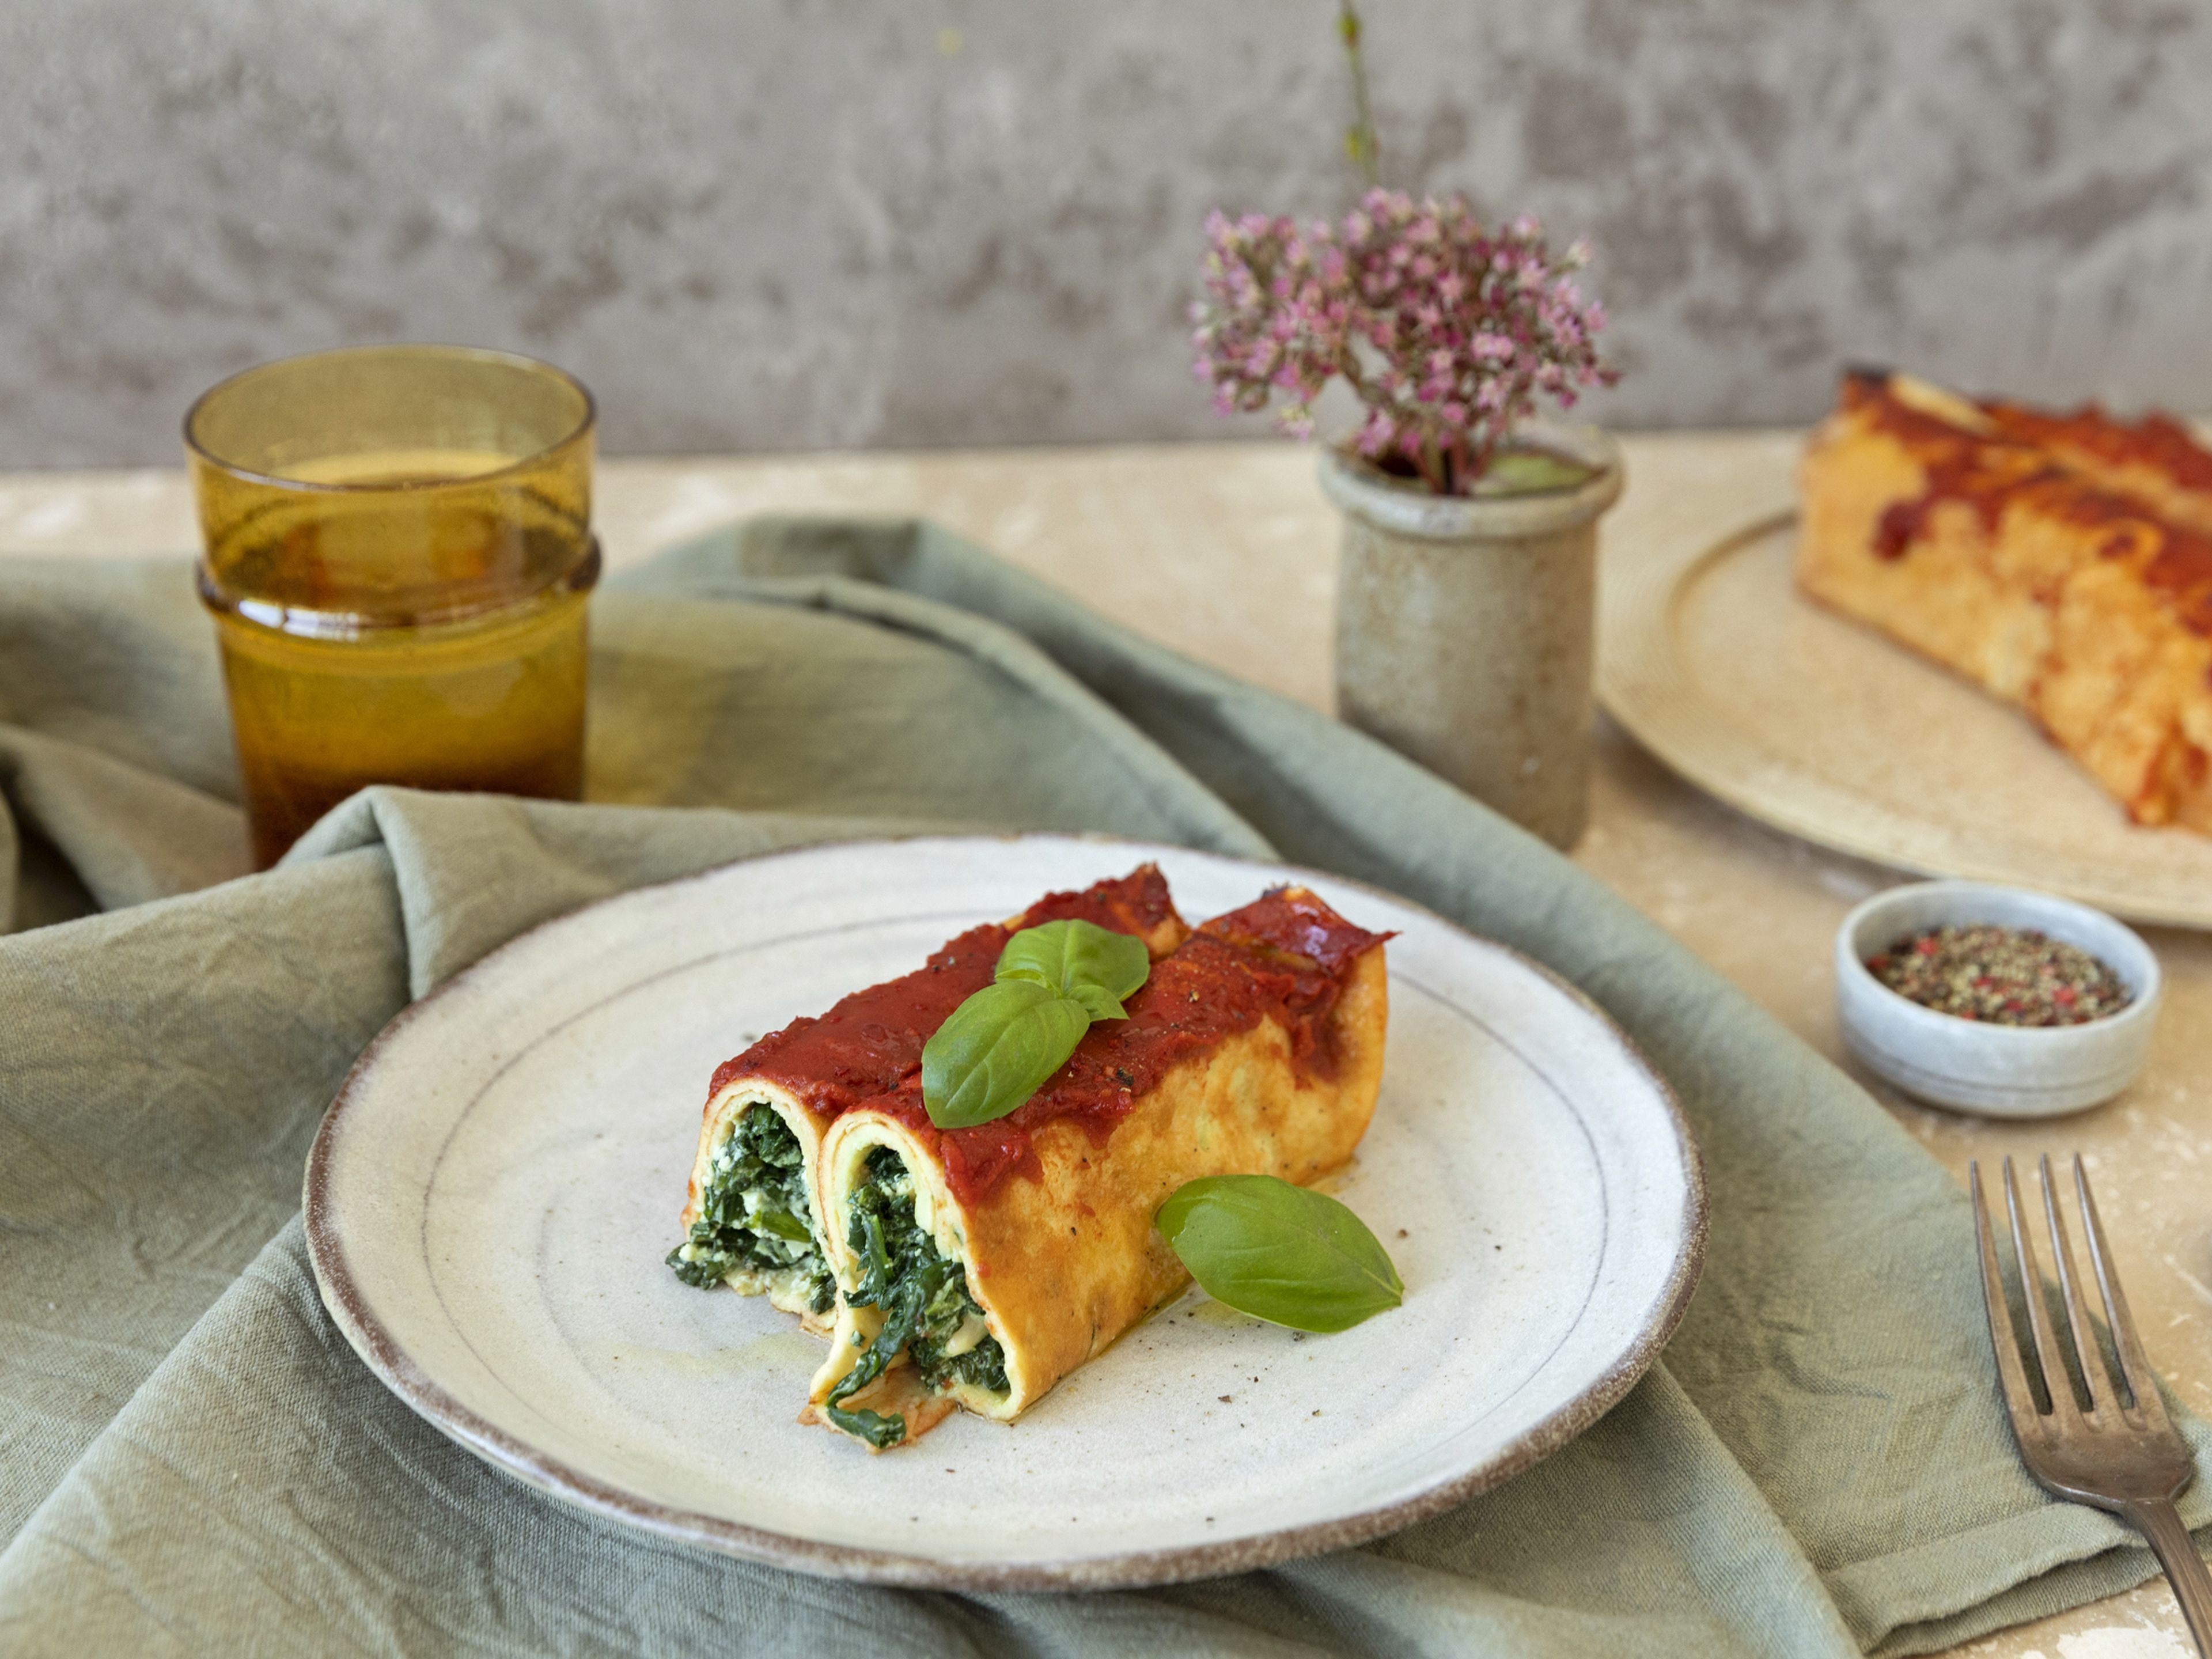 Spinach and pine nut crespelle